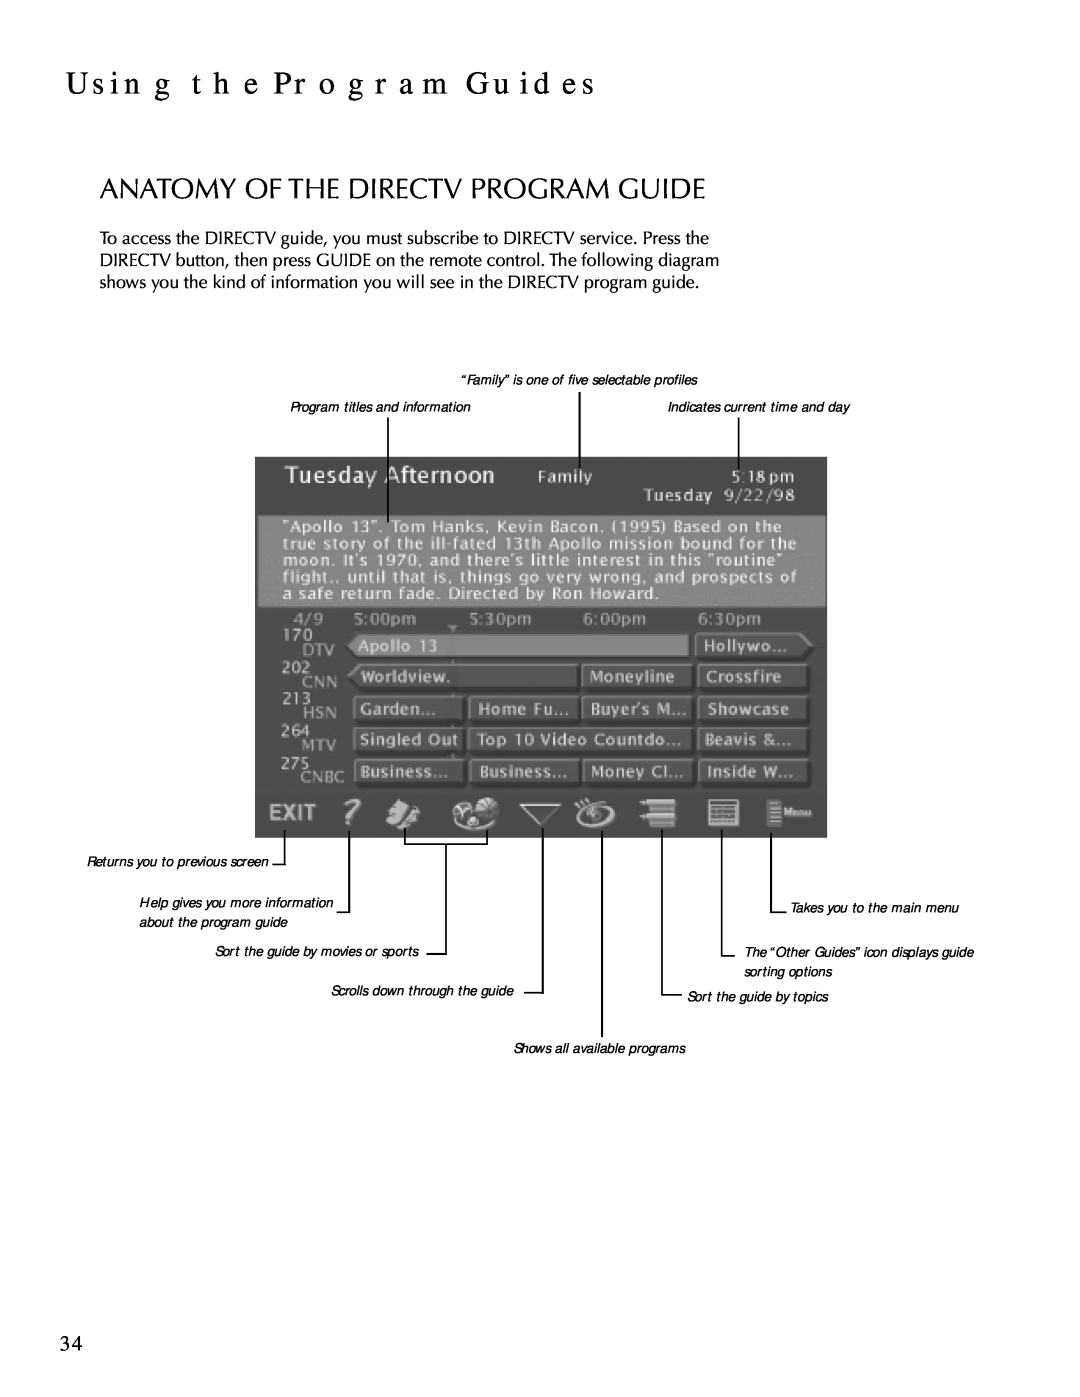 DirecTV HDTV Anatomy Of The Directv Program Guide, Using The Program Guides, “Family” is one of five selectable profiles 